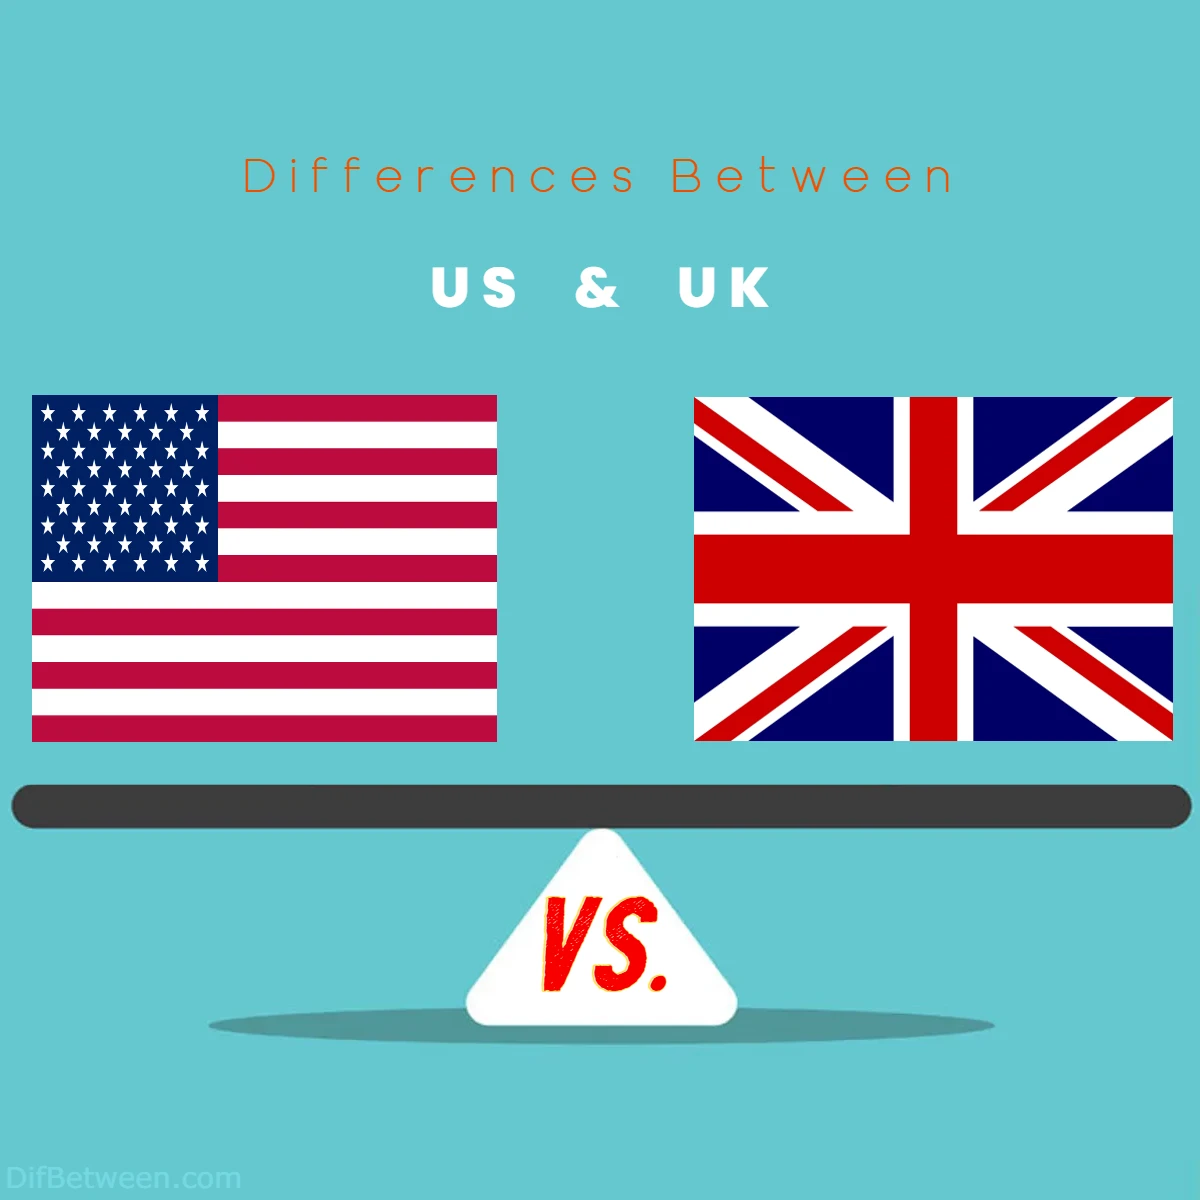 Differences Between US vs UK